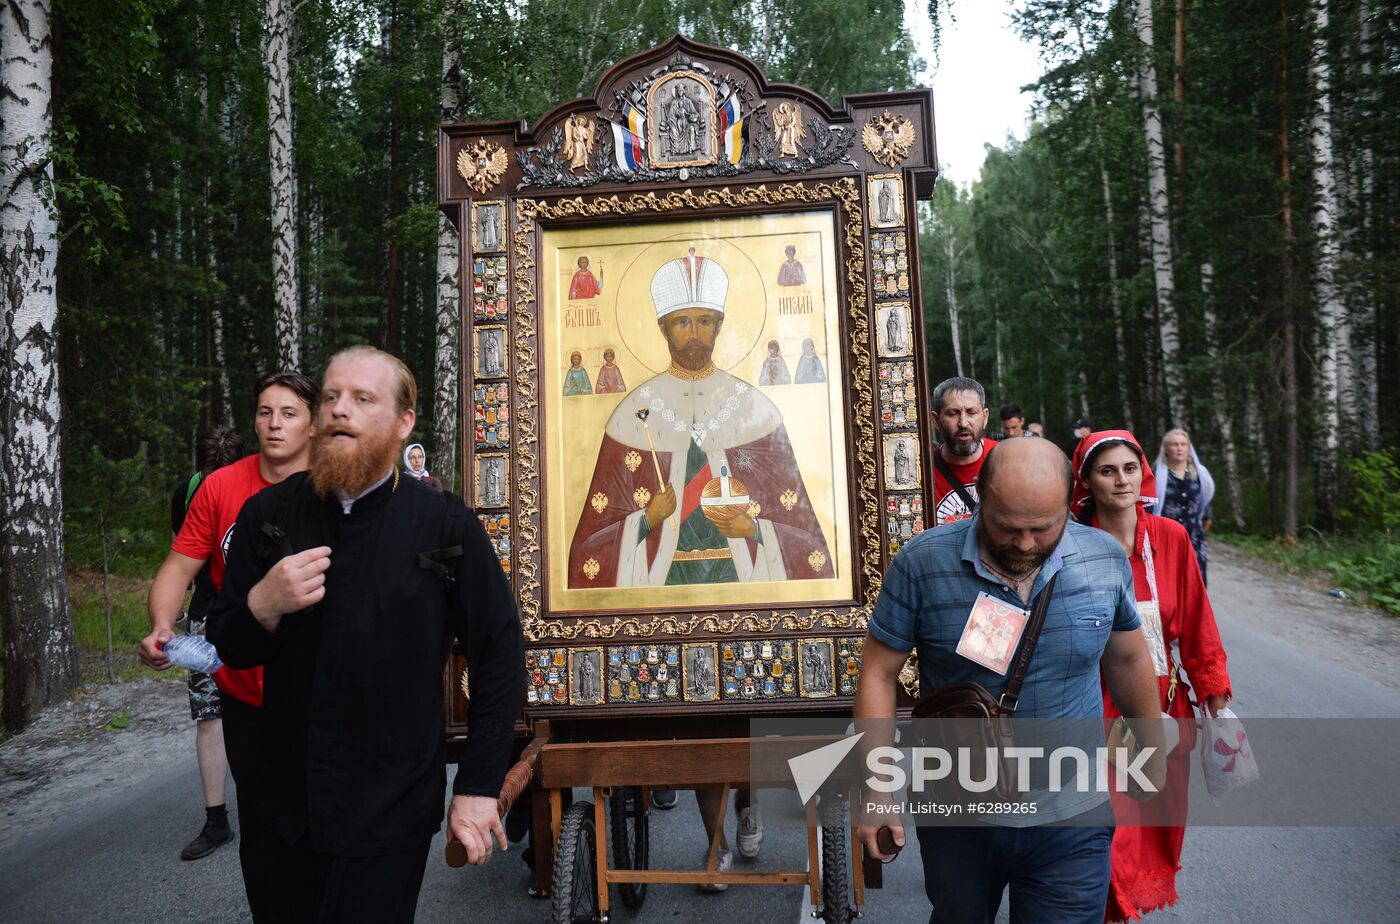 Russia Imperial Romanov Family's Execution Anniversary